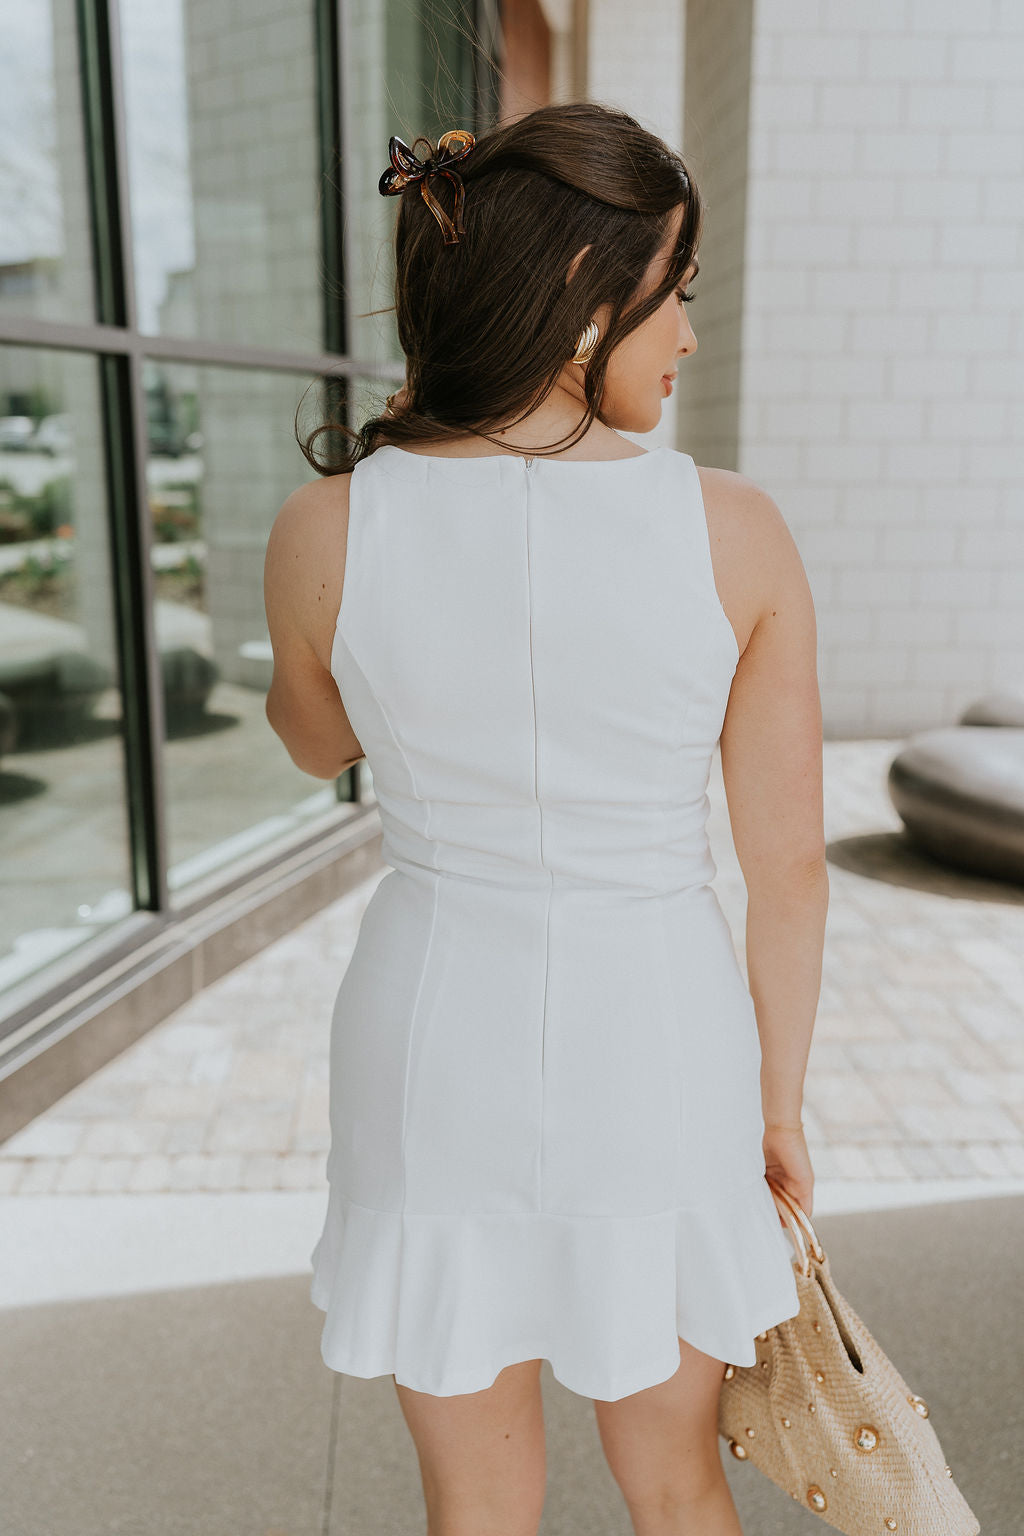 Back view of female model wearing the Isabel White Sleeveless Mini Dress that has white fabric, a notched neckline, mini length, and sleeveless bodice. Model is holding beige purse.